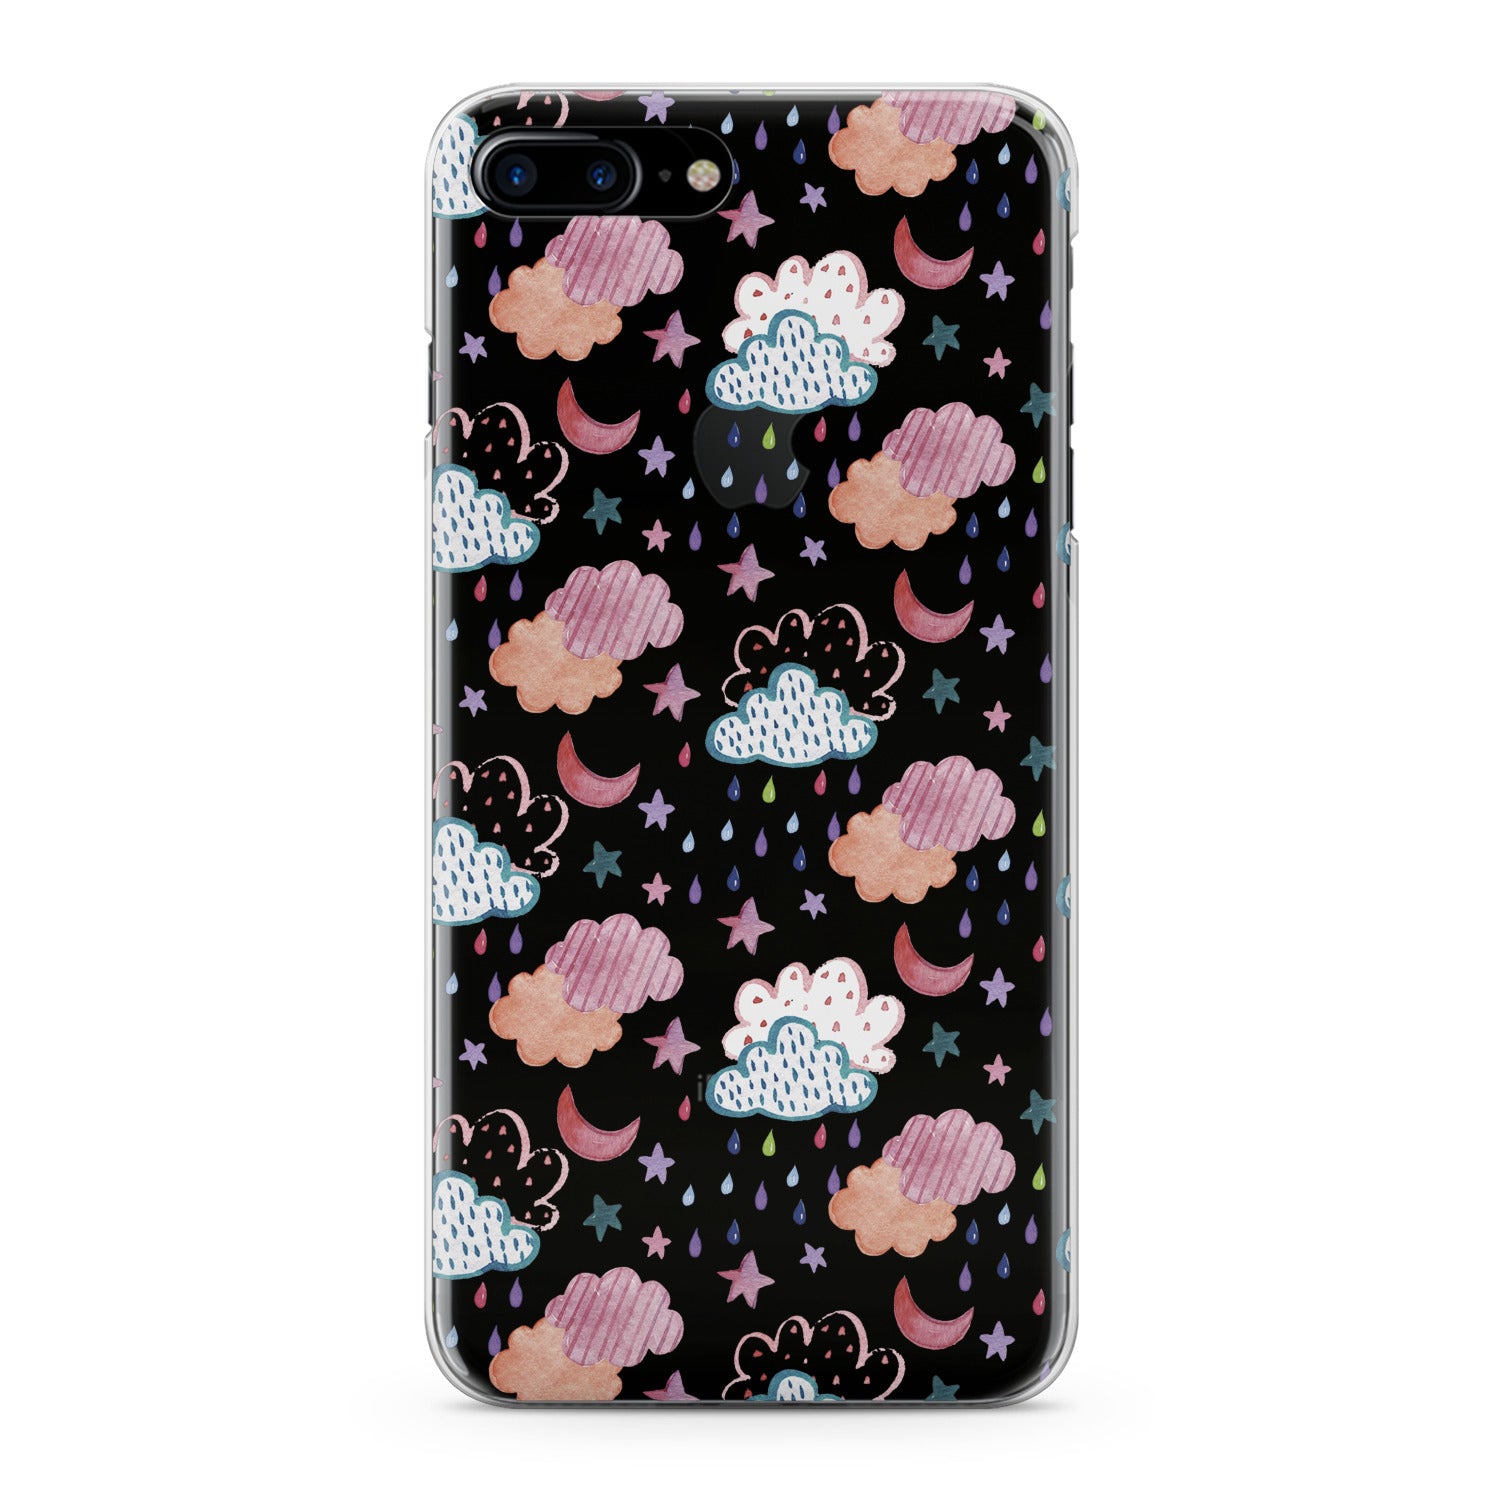 Lex Altern Cute Clouds Phone Case for your iPhone & Android phone.